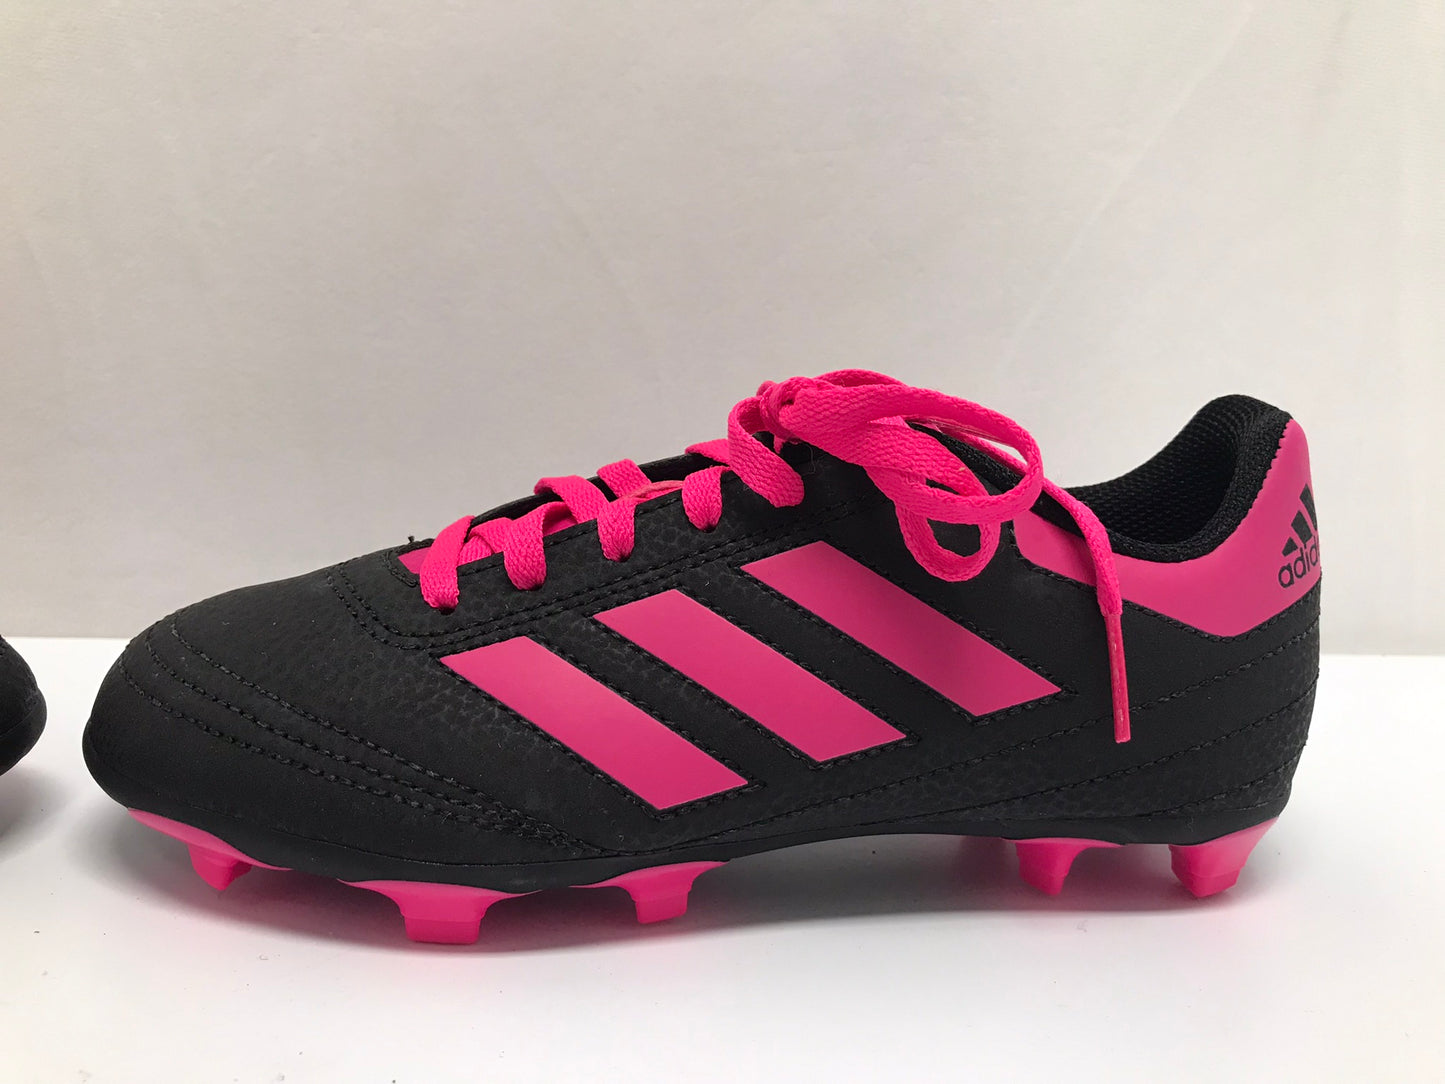 Soccer Shoes Cleats Child Size 2.5 Adidas Fushia Black New With Tags